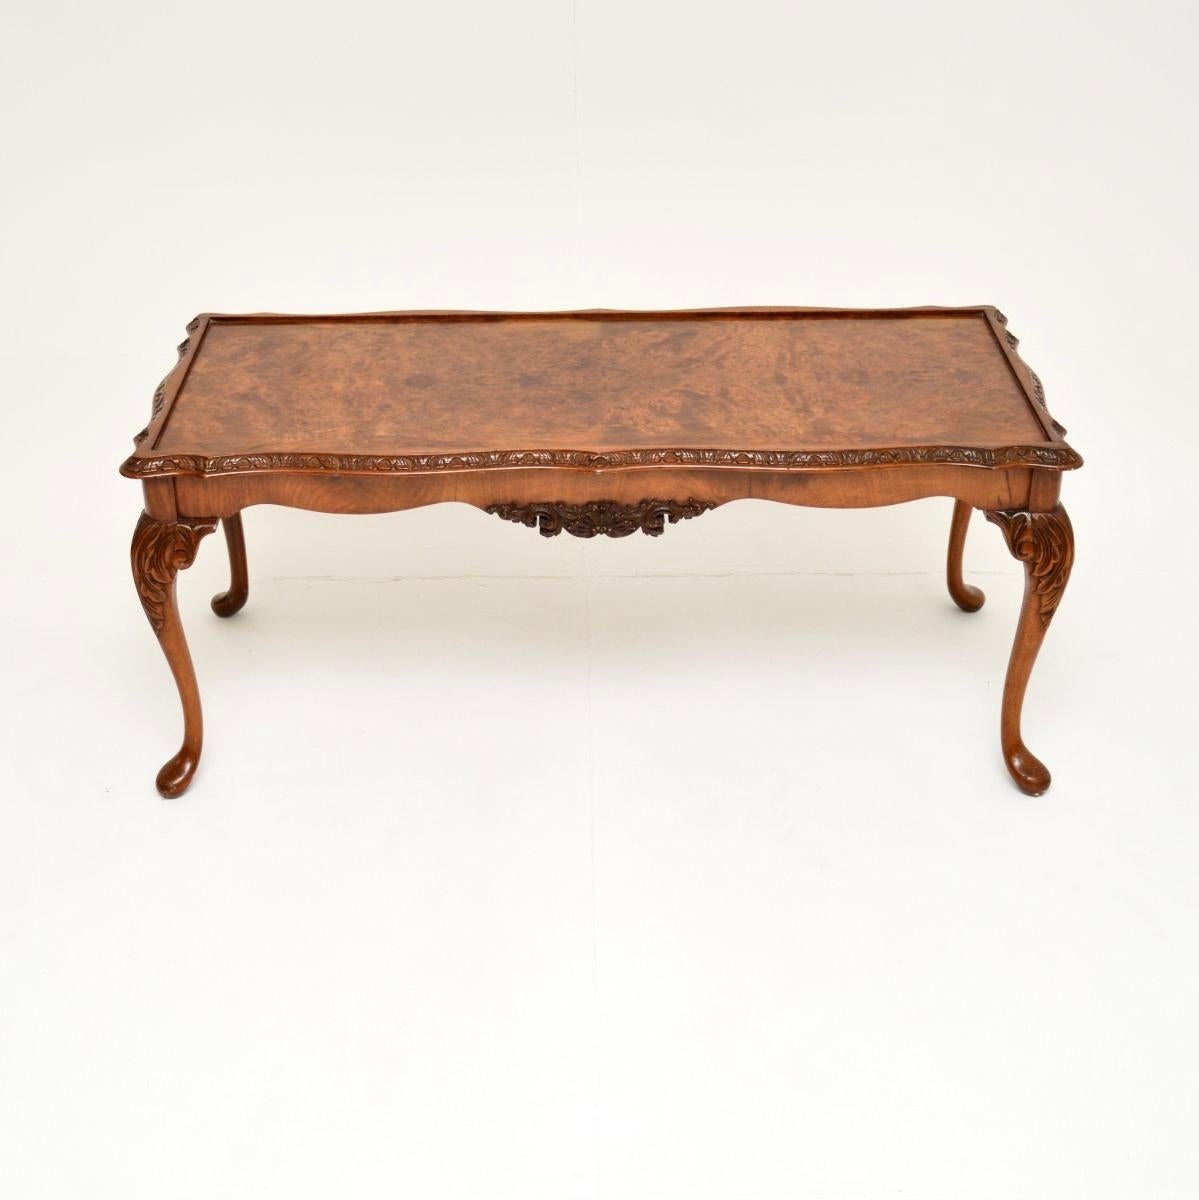 A beautiful antique Queen Anne style burr walnut coffee table, made in England and dating from around the 1950’s.

This is of lovely quality, its stands on cabriole legs with shell carving at the knees, there is also wonderful carving around the top